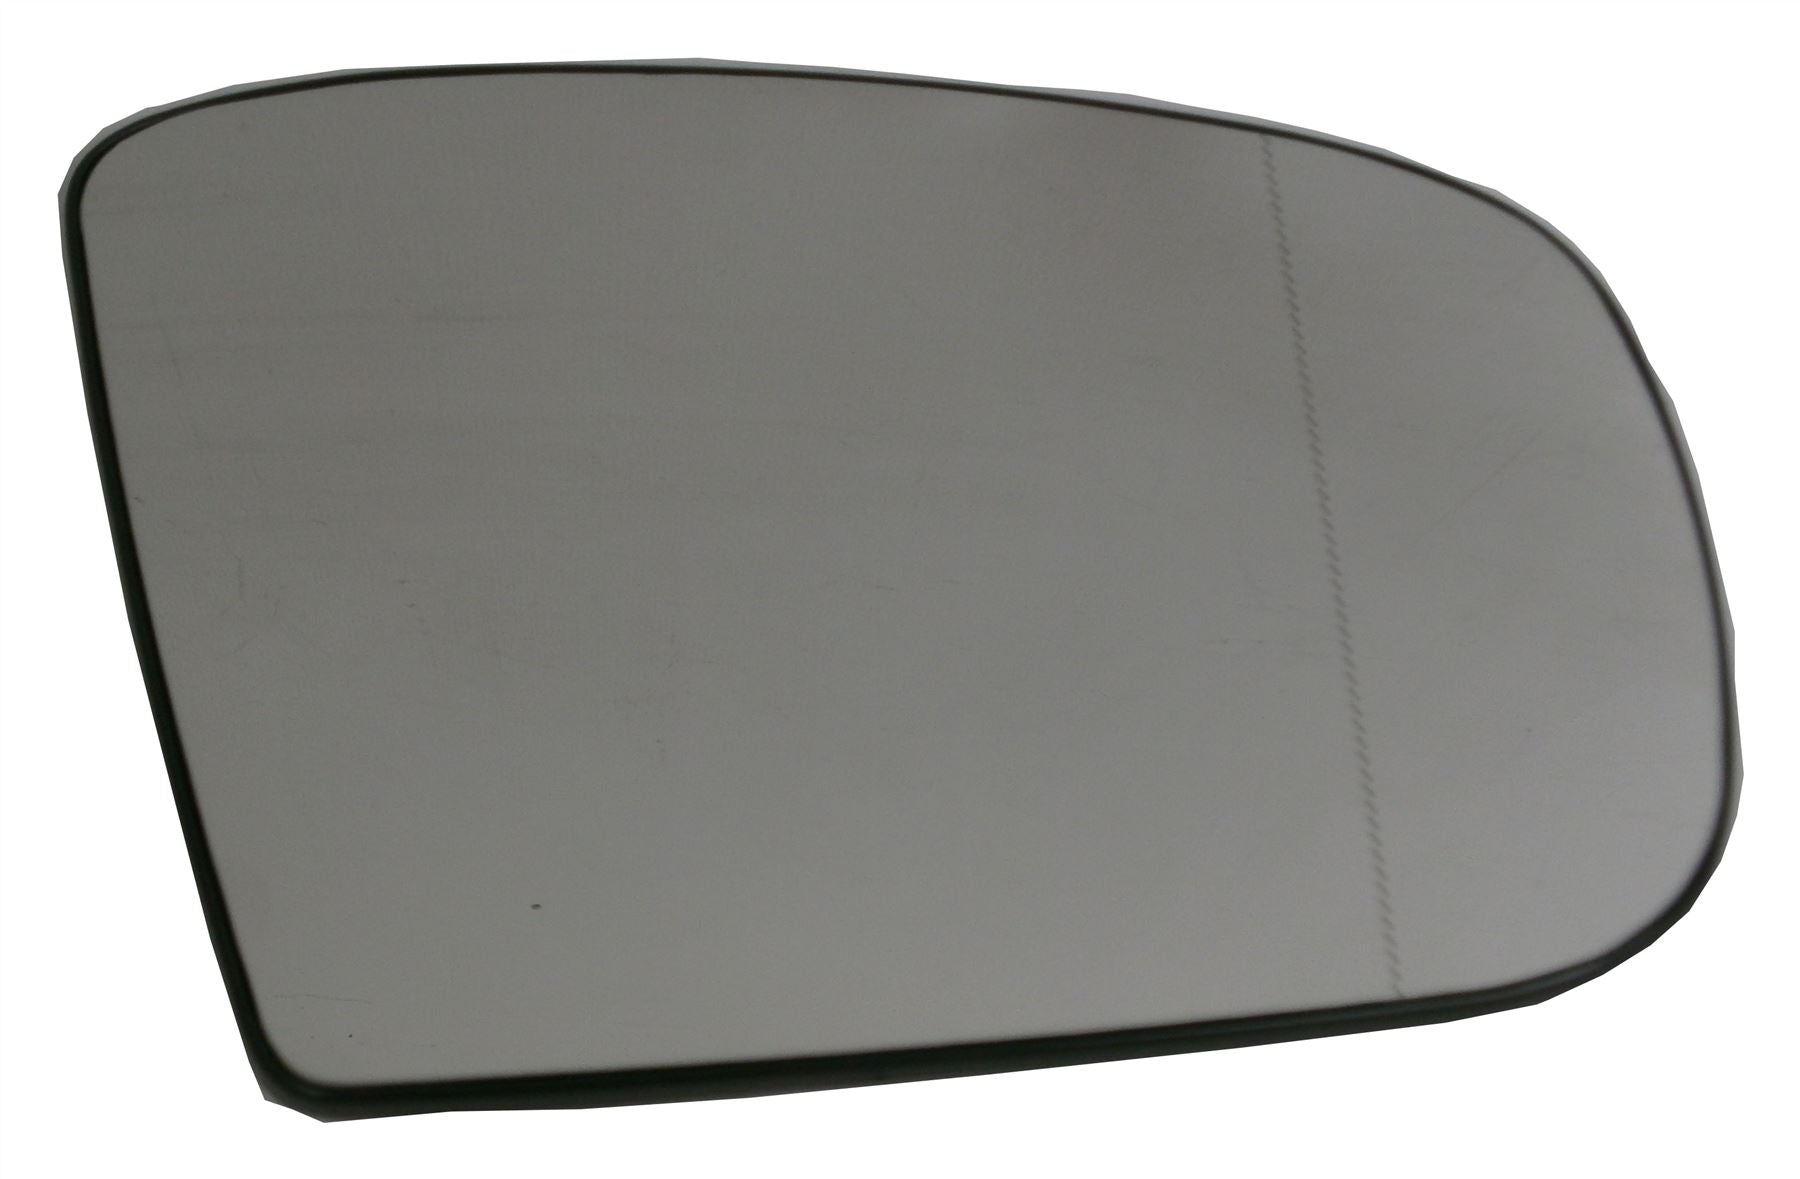 Mercedes M Class W163 2001-2005 Heated Wing Mirror Glass Drivers Side O/S